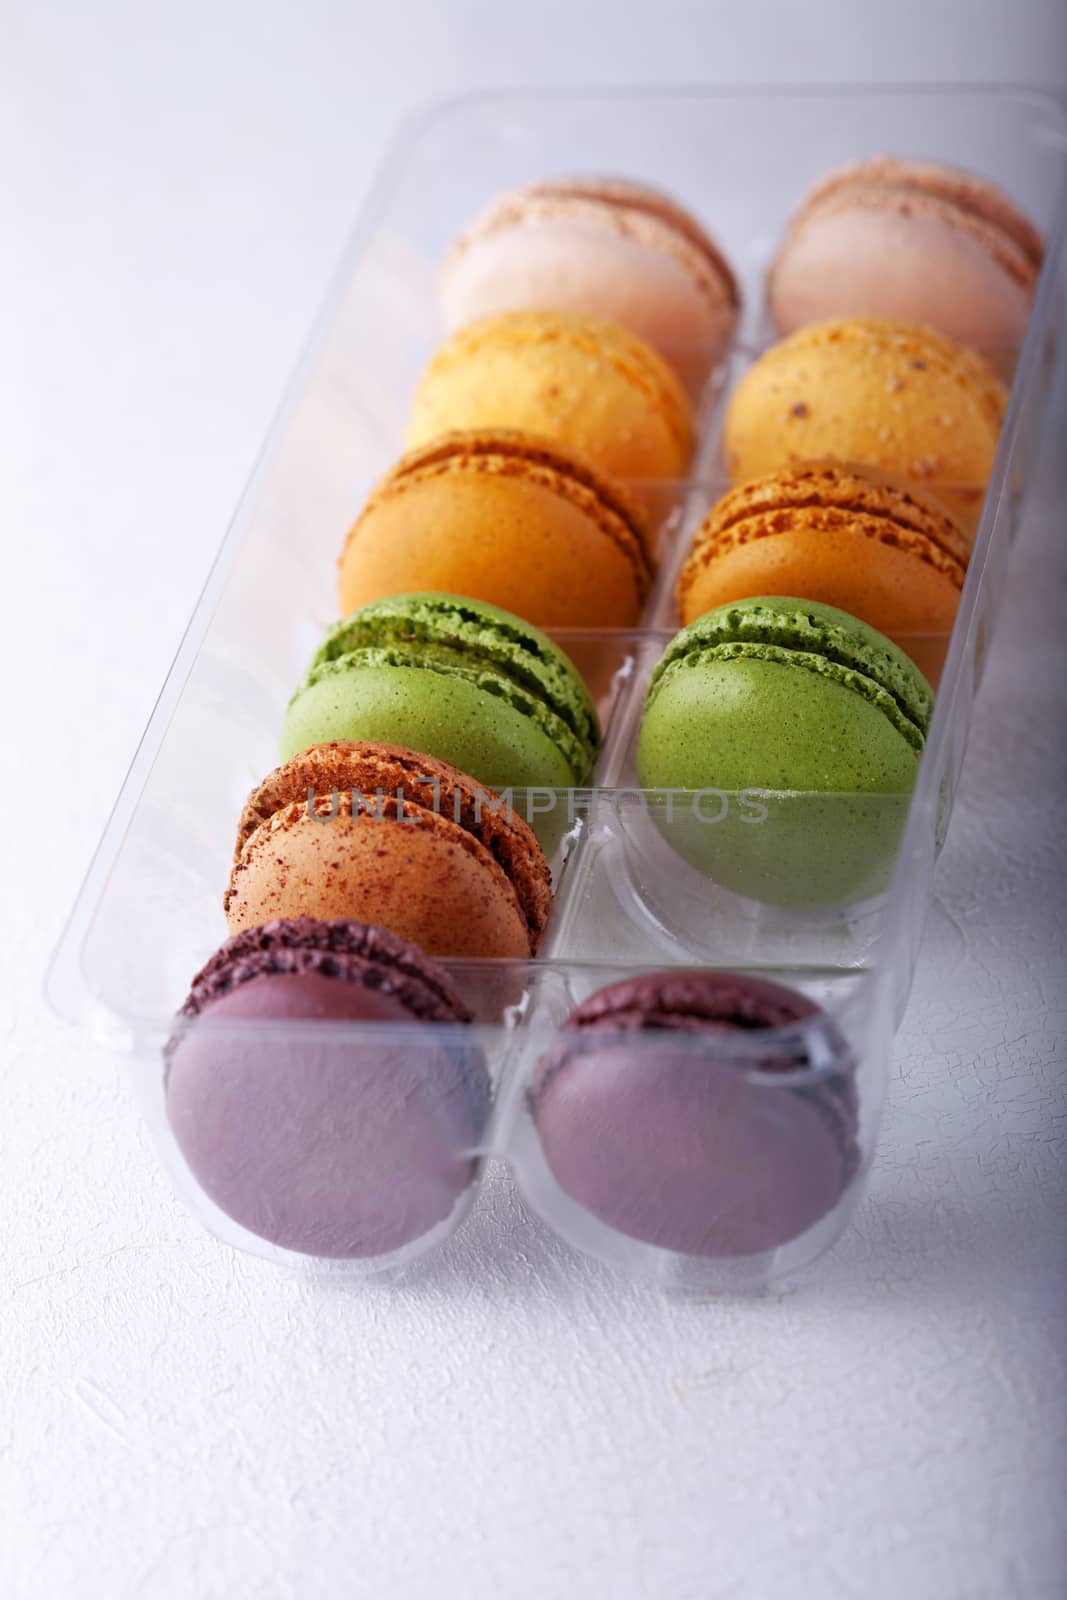 Multicolored Almond cookies Macaroons in a Box